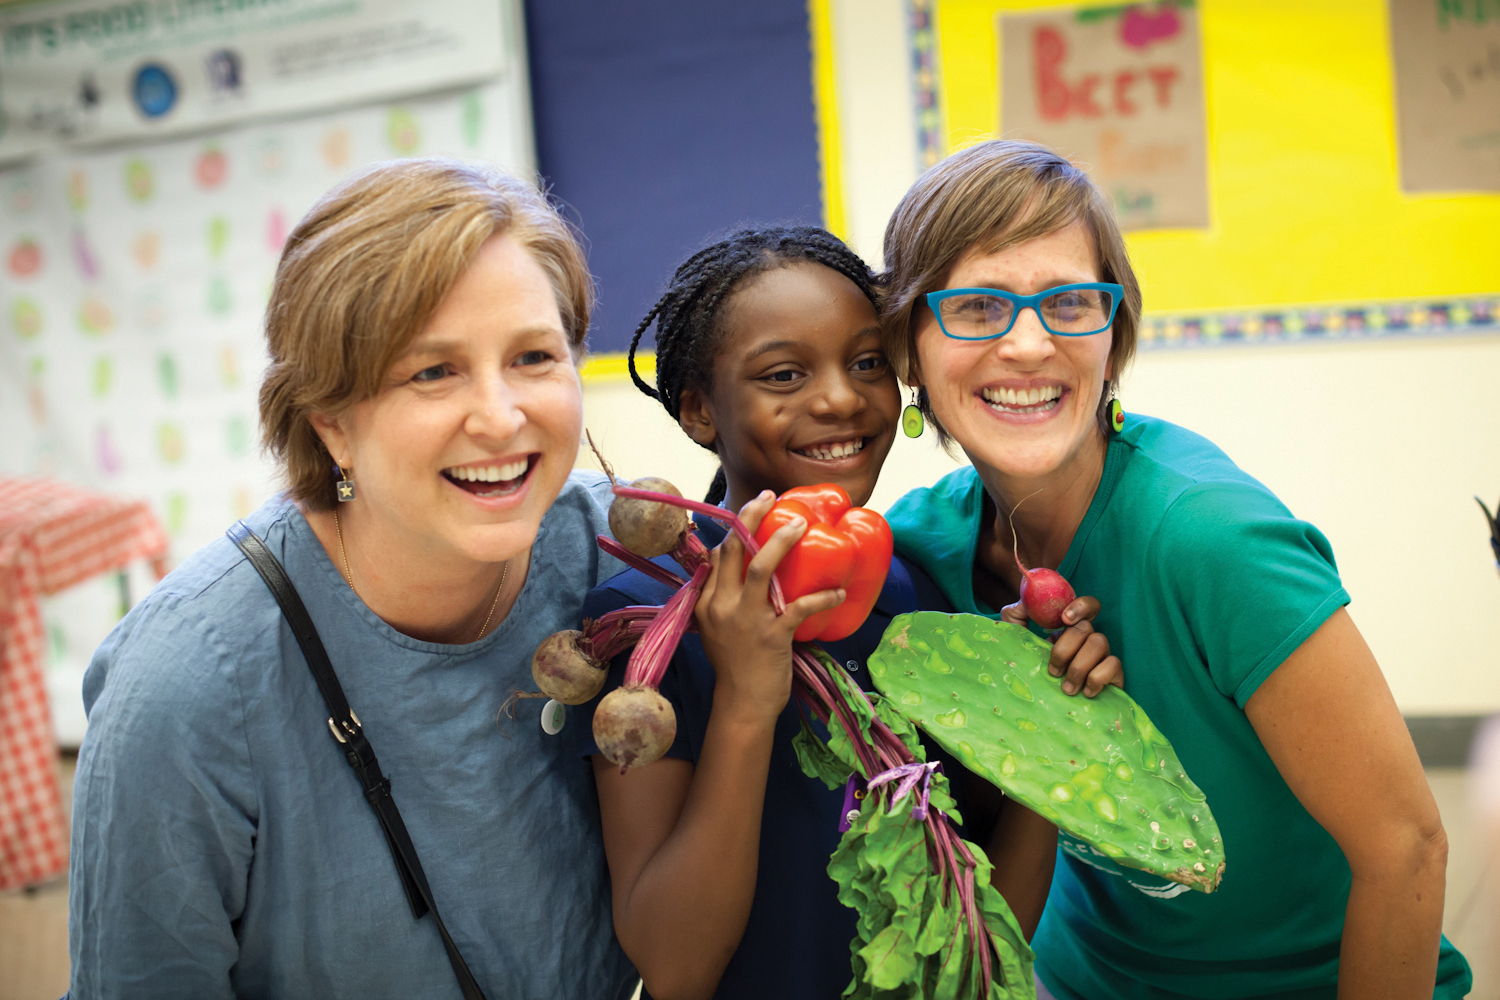 “It’s easy to give a kid junk food. It takes a lot of joy and bravery to show up with vegetables. But kids notice when you do, because what they notice is that you care about them and their health,” says Amber Stott (pictured at right). (Photo by Amy Nicole)